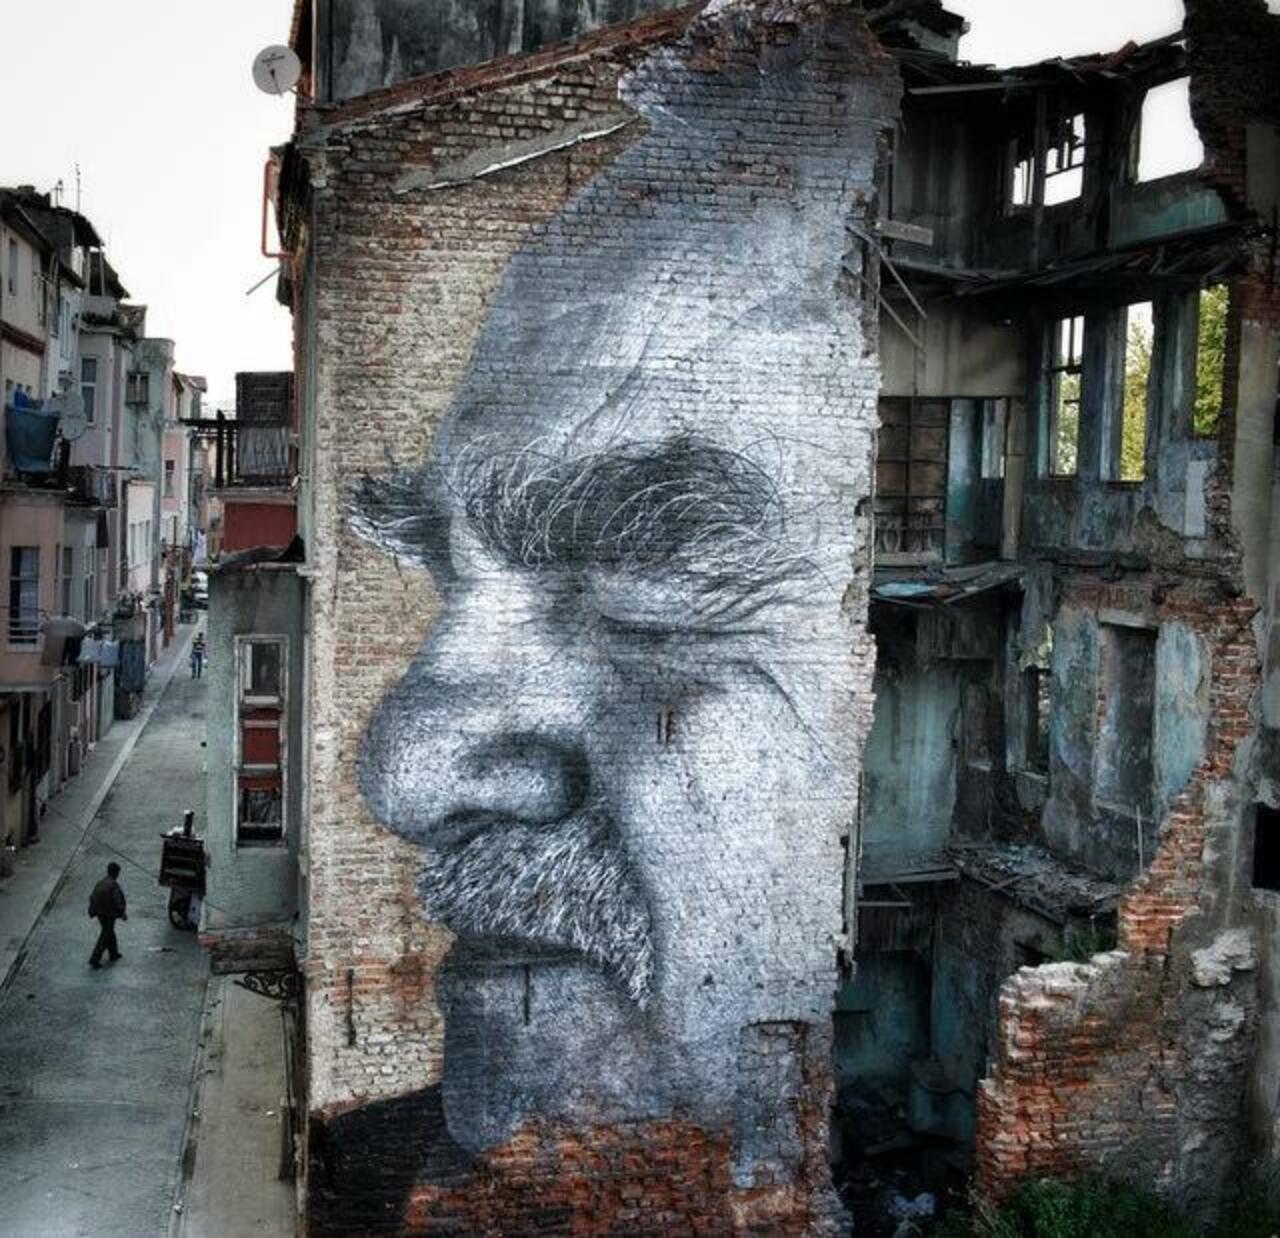 Street Art by JR in Istanbul & after local police painted over it 

#art #arte #graffiti #streetart http://t.co/cdADVrP8CJ